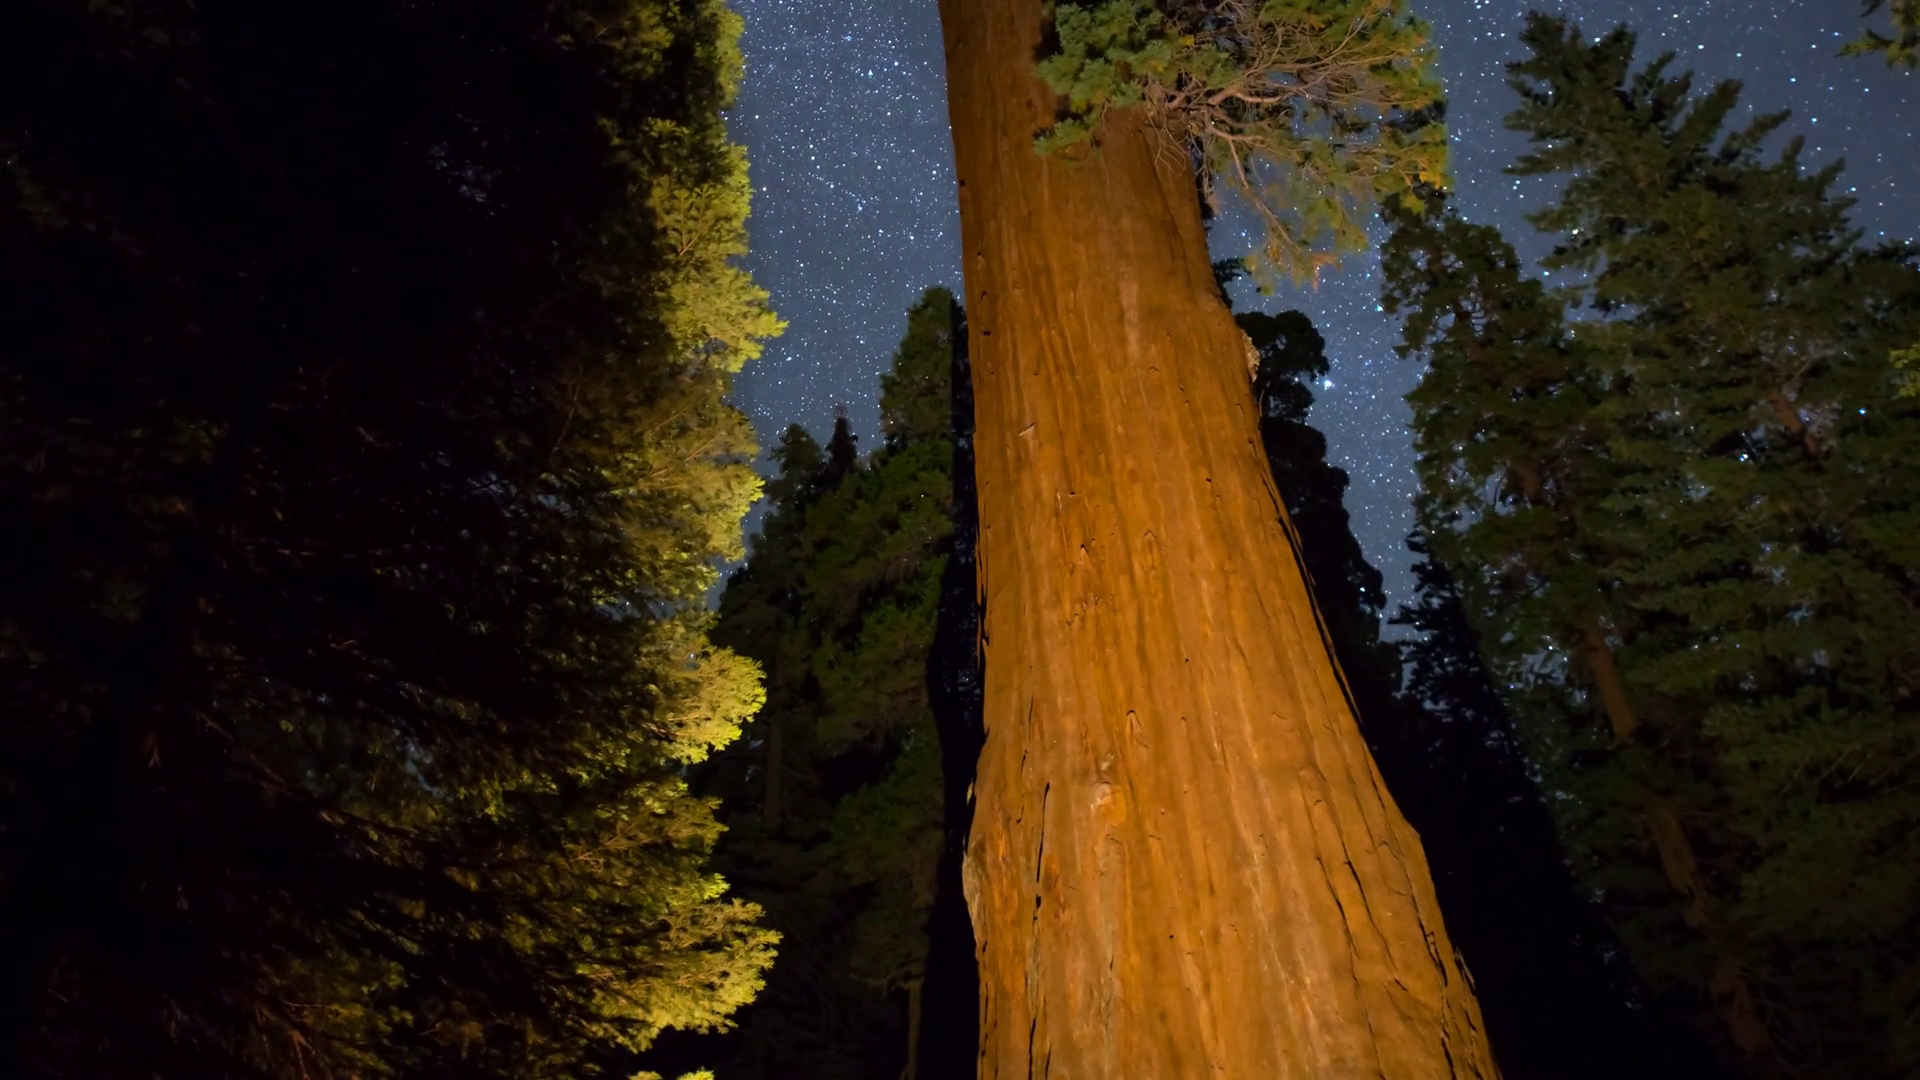 Moco Astro Timelapse Tracking Shot Of General Grant Tree In